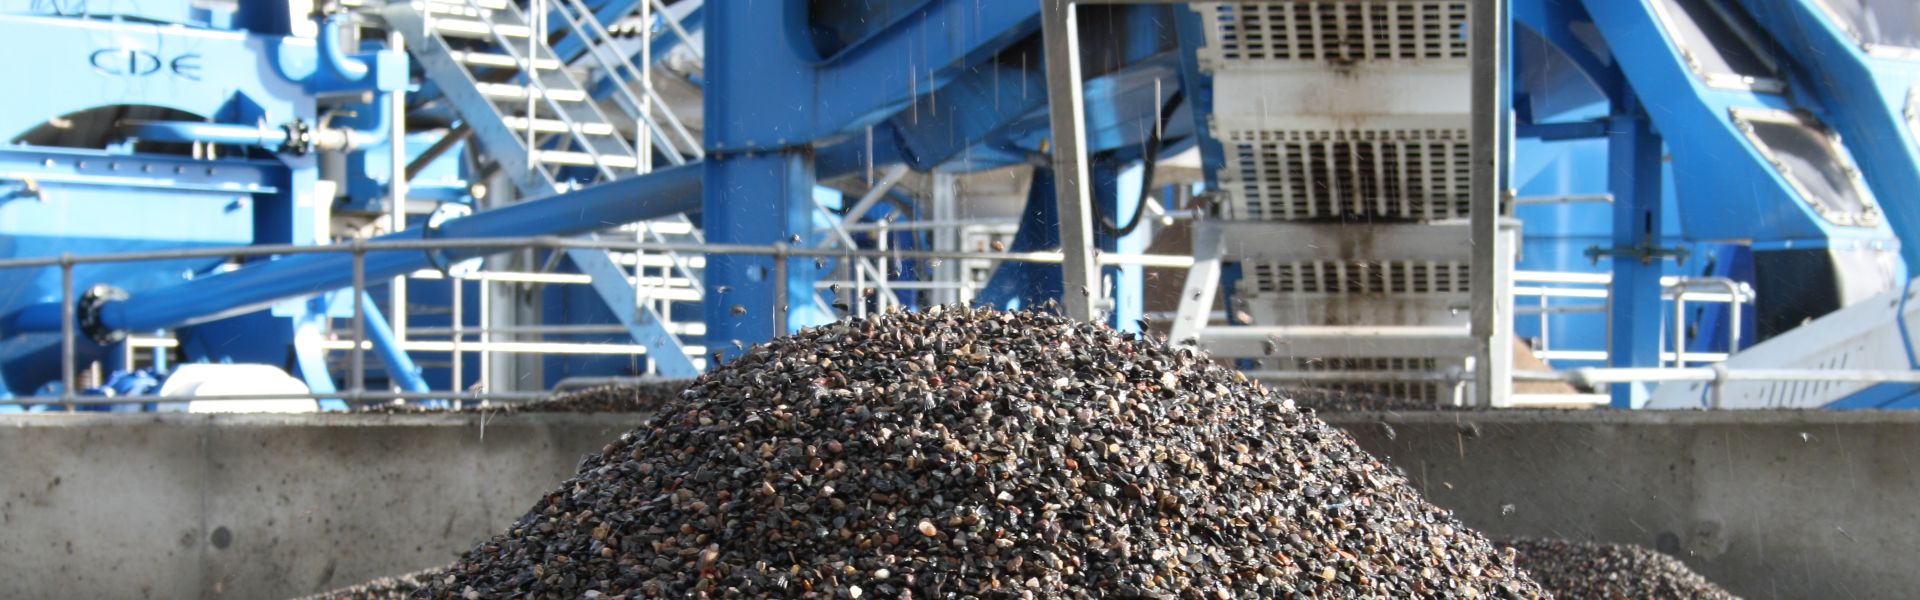 ASH Group extend sustainable waste management offering with investment in new CDE wash plant